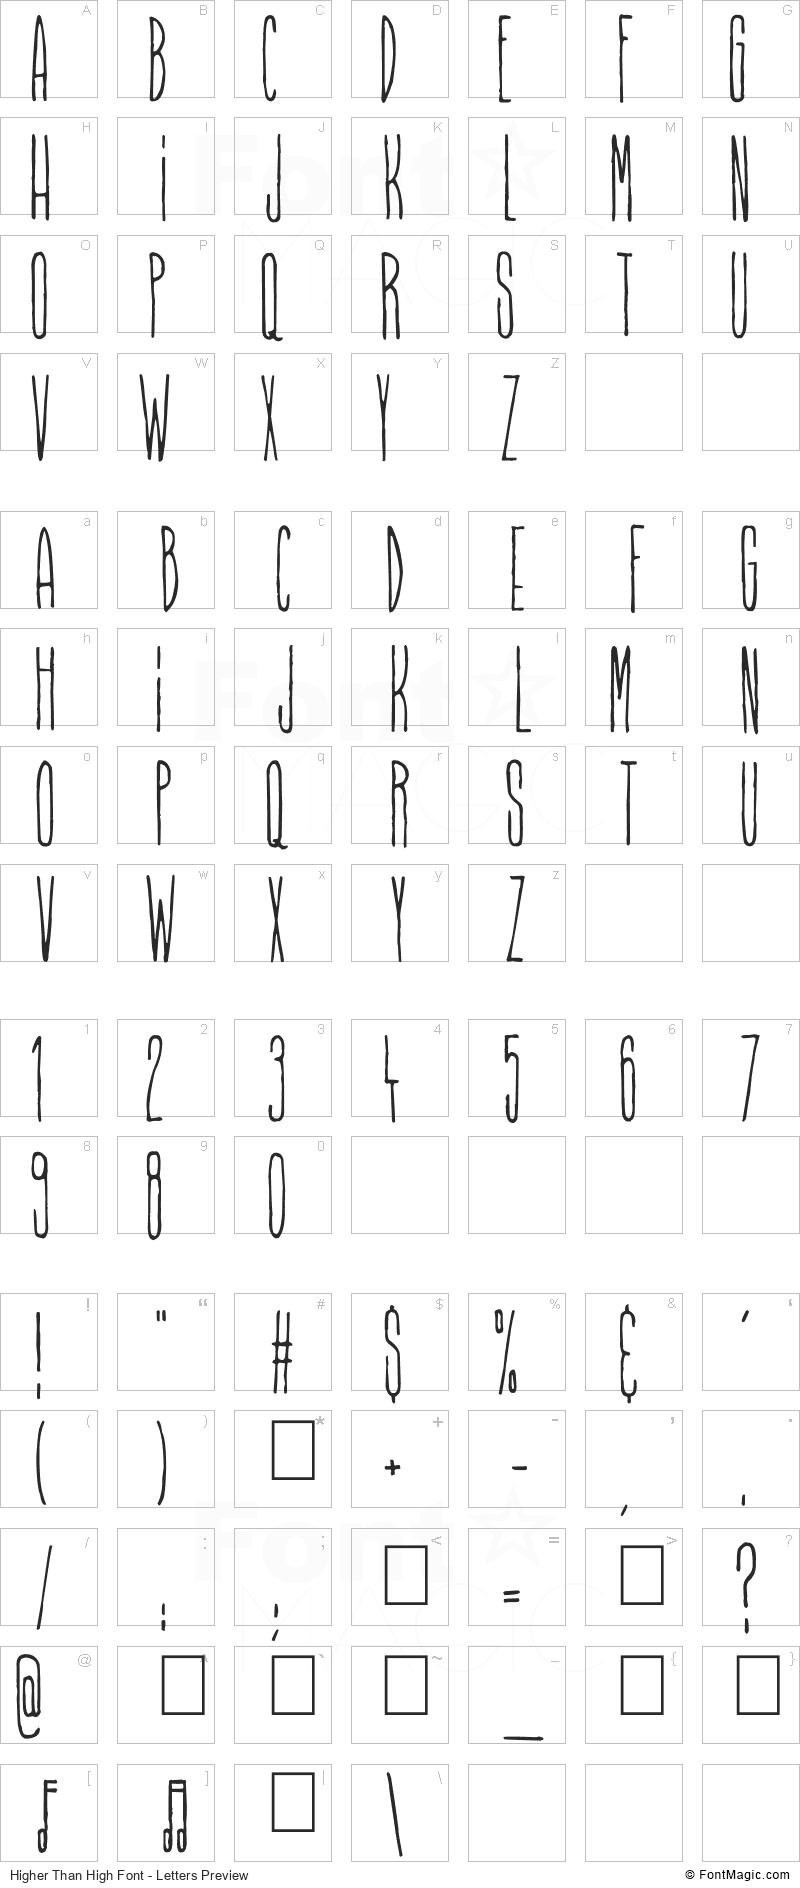 Higher Than High Font - All Latters Preview Chart